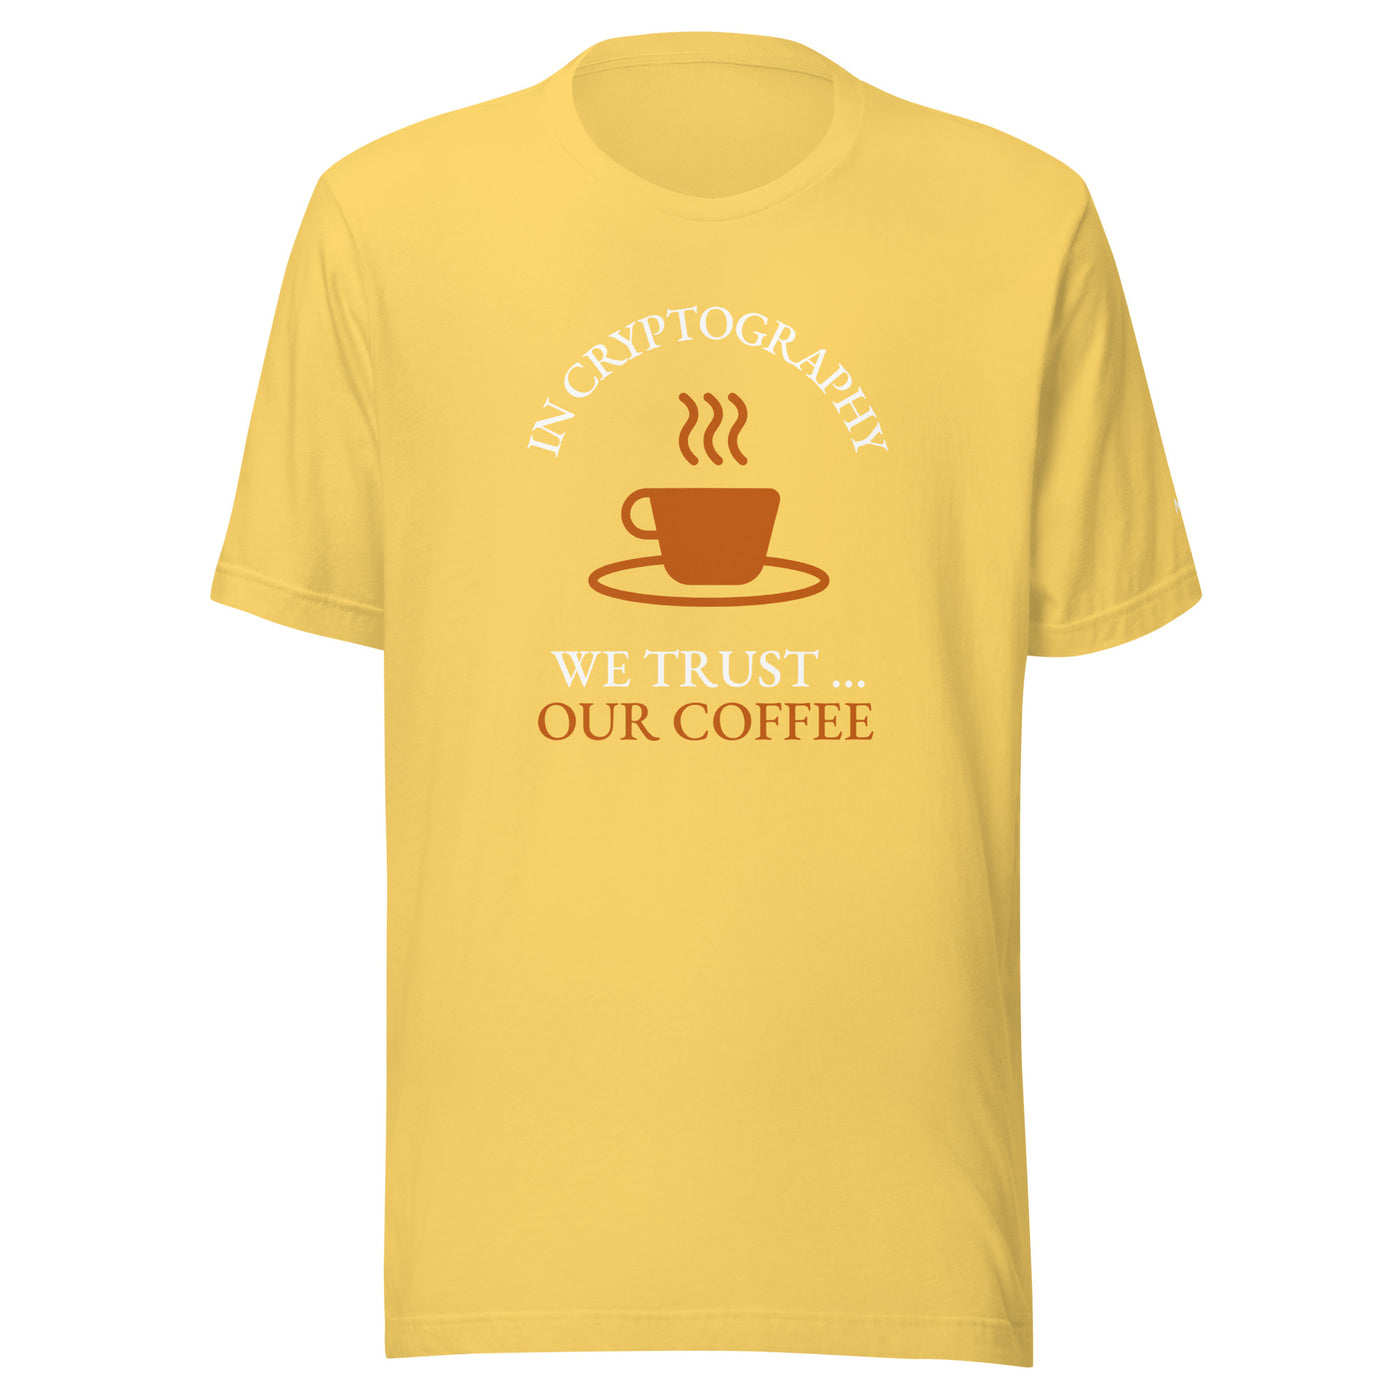 In cryptography, we trust... our coffee (Orange Text) - Unisex t-shirt